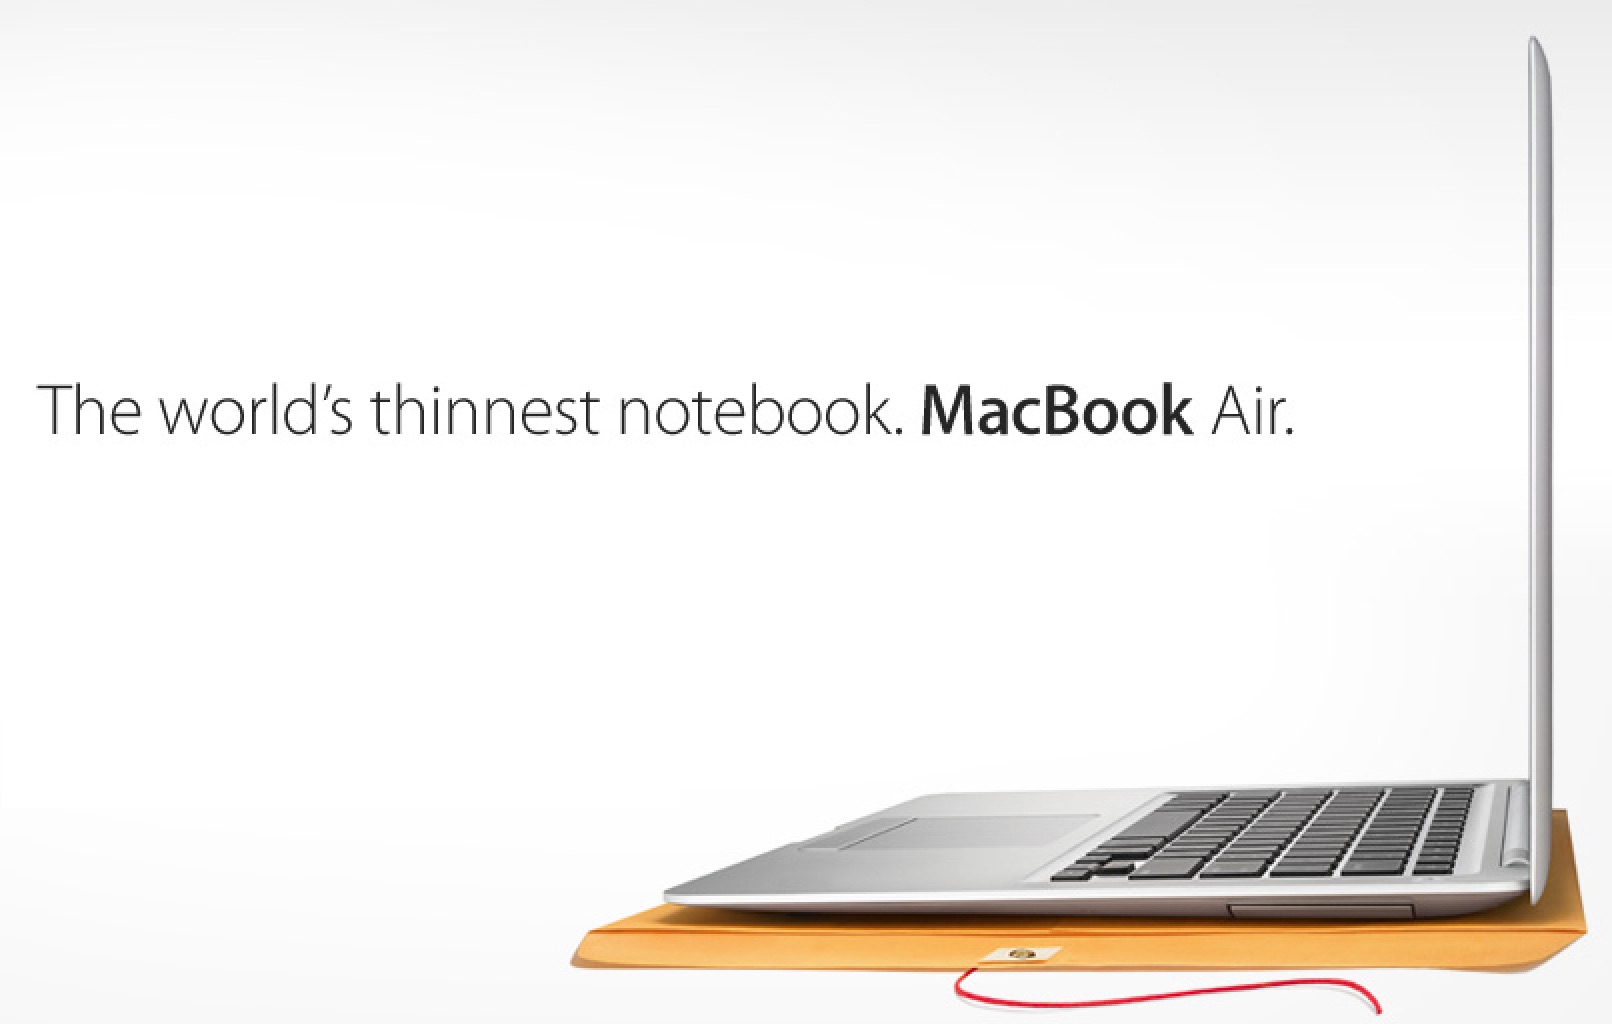 A plain manila envelope became a key stage prop for selling the MacBook Air.